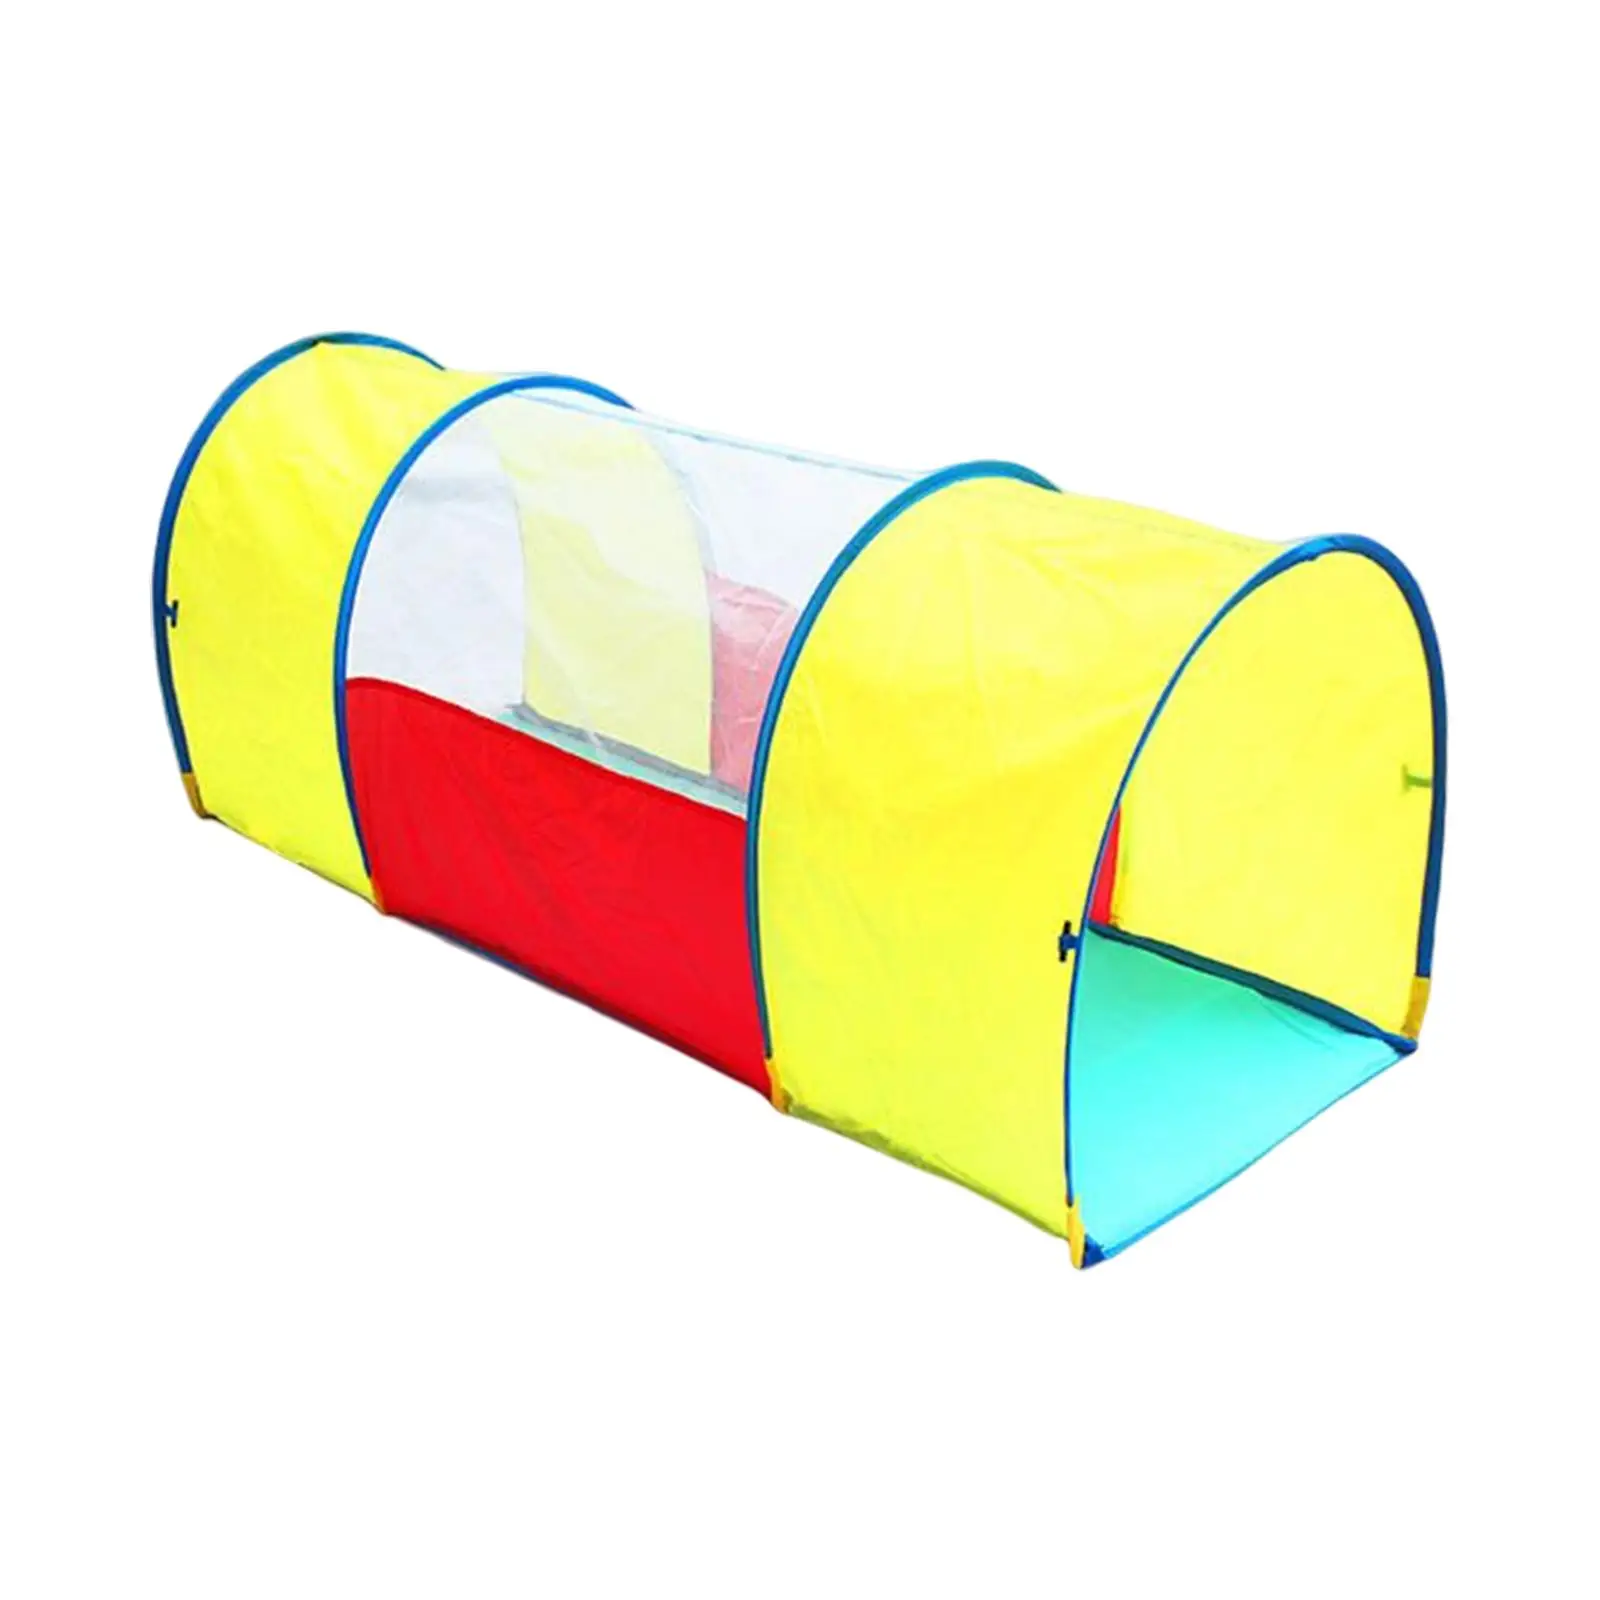 Portable Play Tent Toy Backyard Playset Indoor Outdoor Game for Toddlers